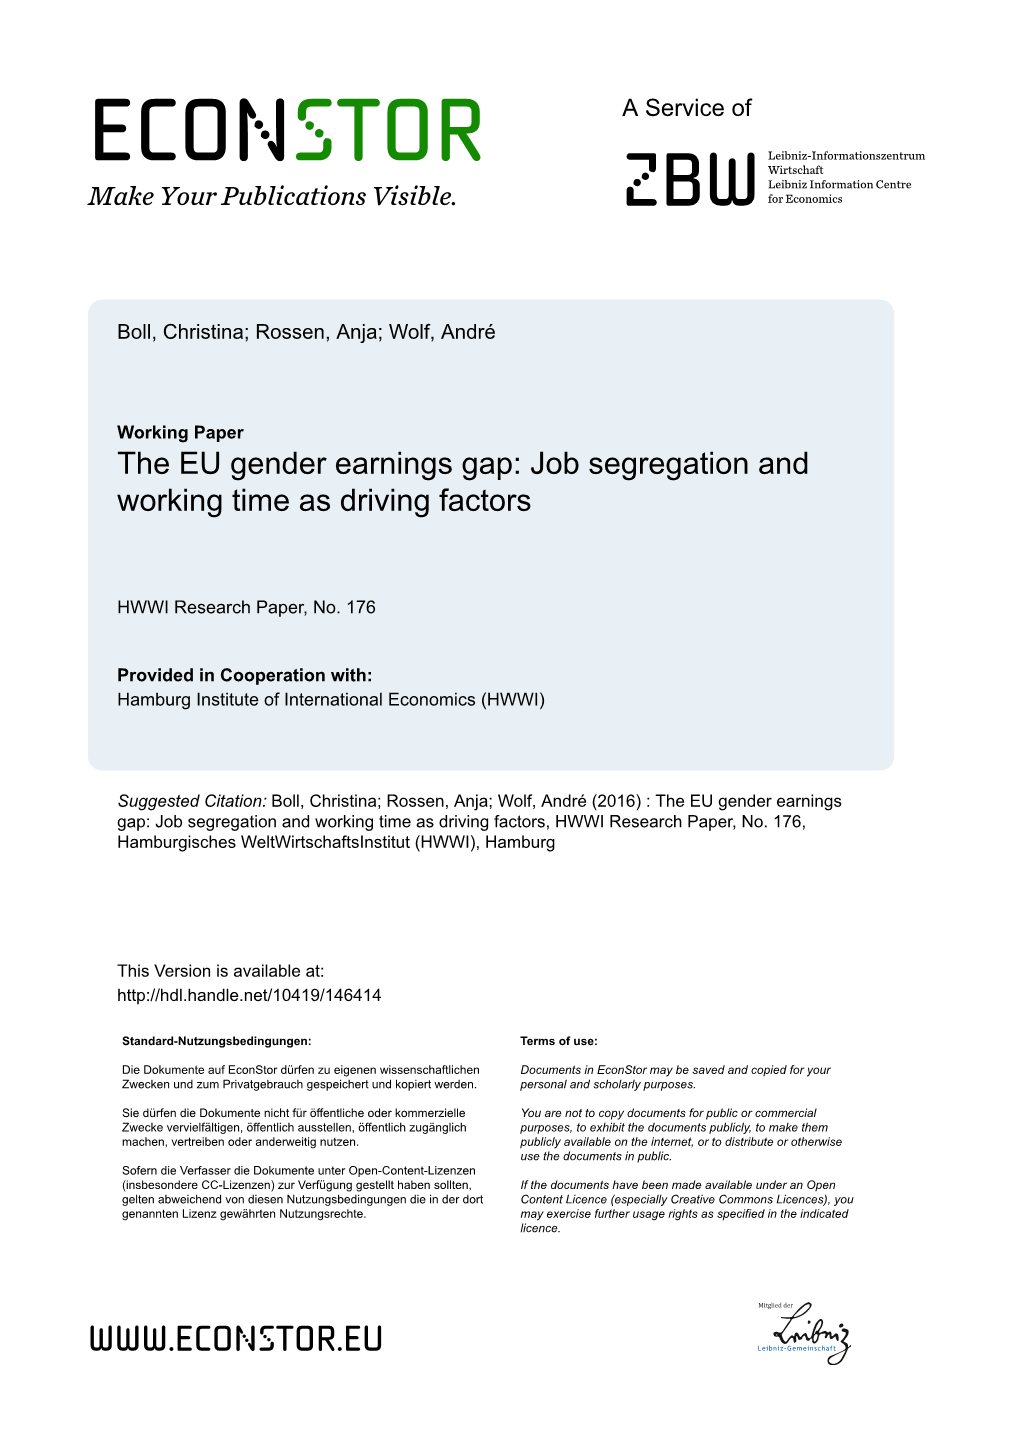 The EU Gender Earnings Gap: Job Segregation and Working Time As Driving Factors